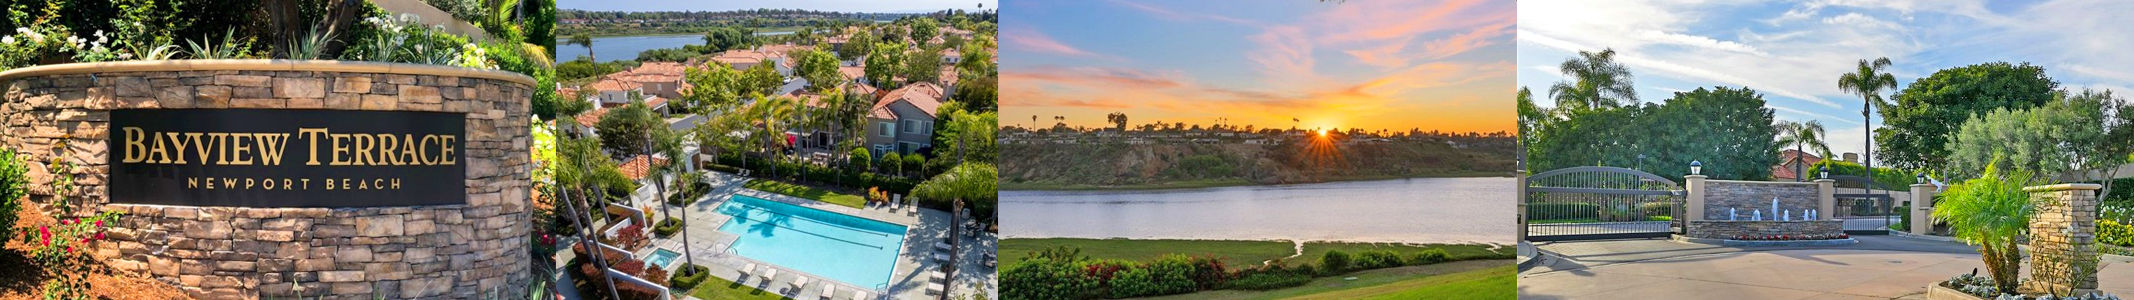 Bayview Terrace Newport Beach Homes For Sale